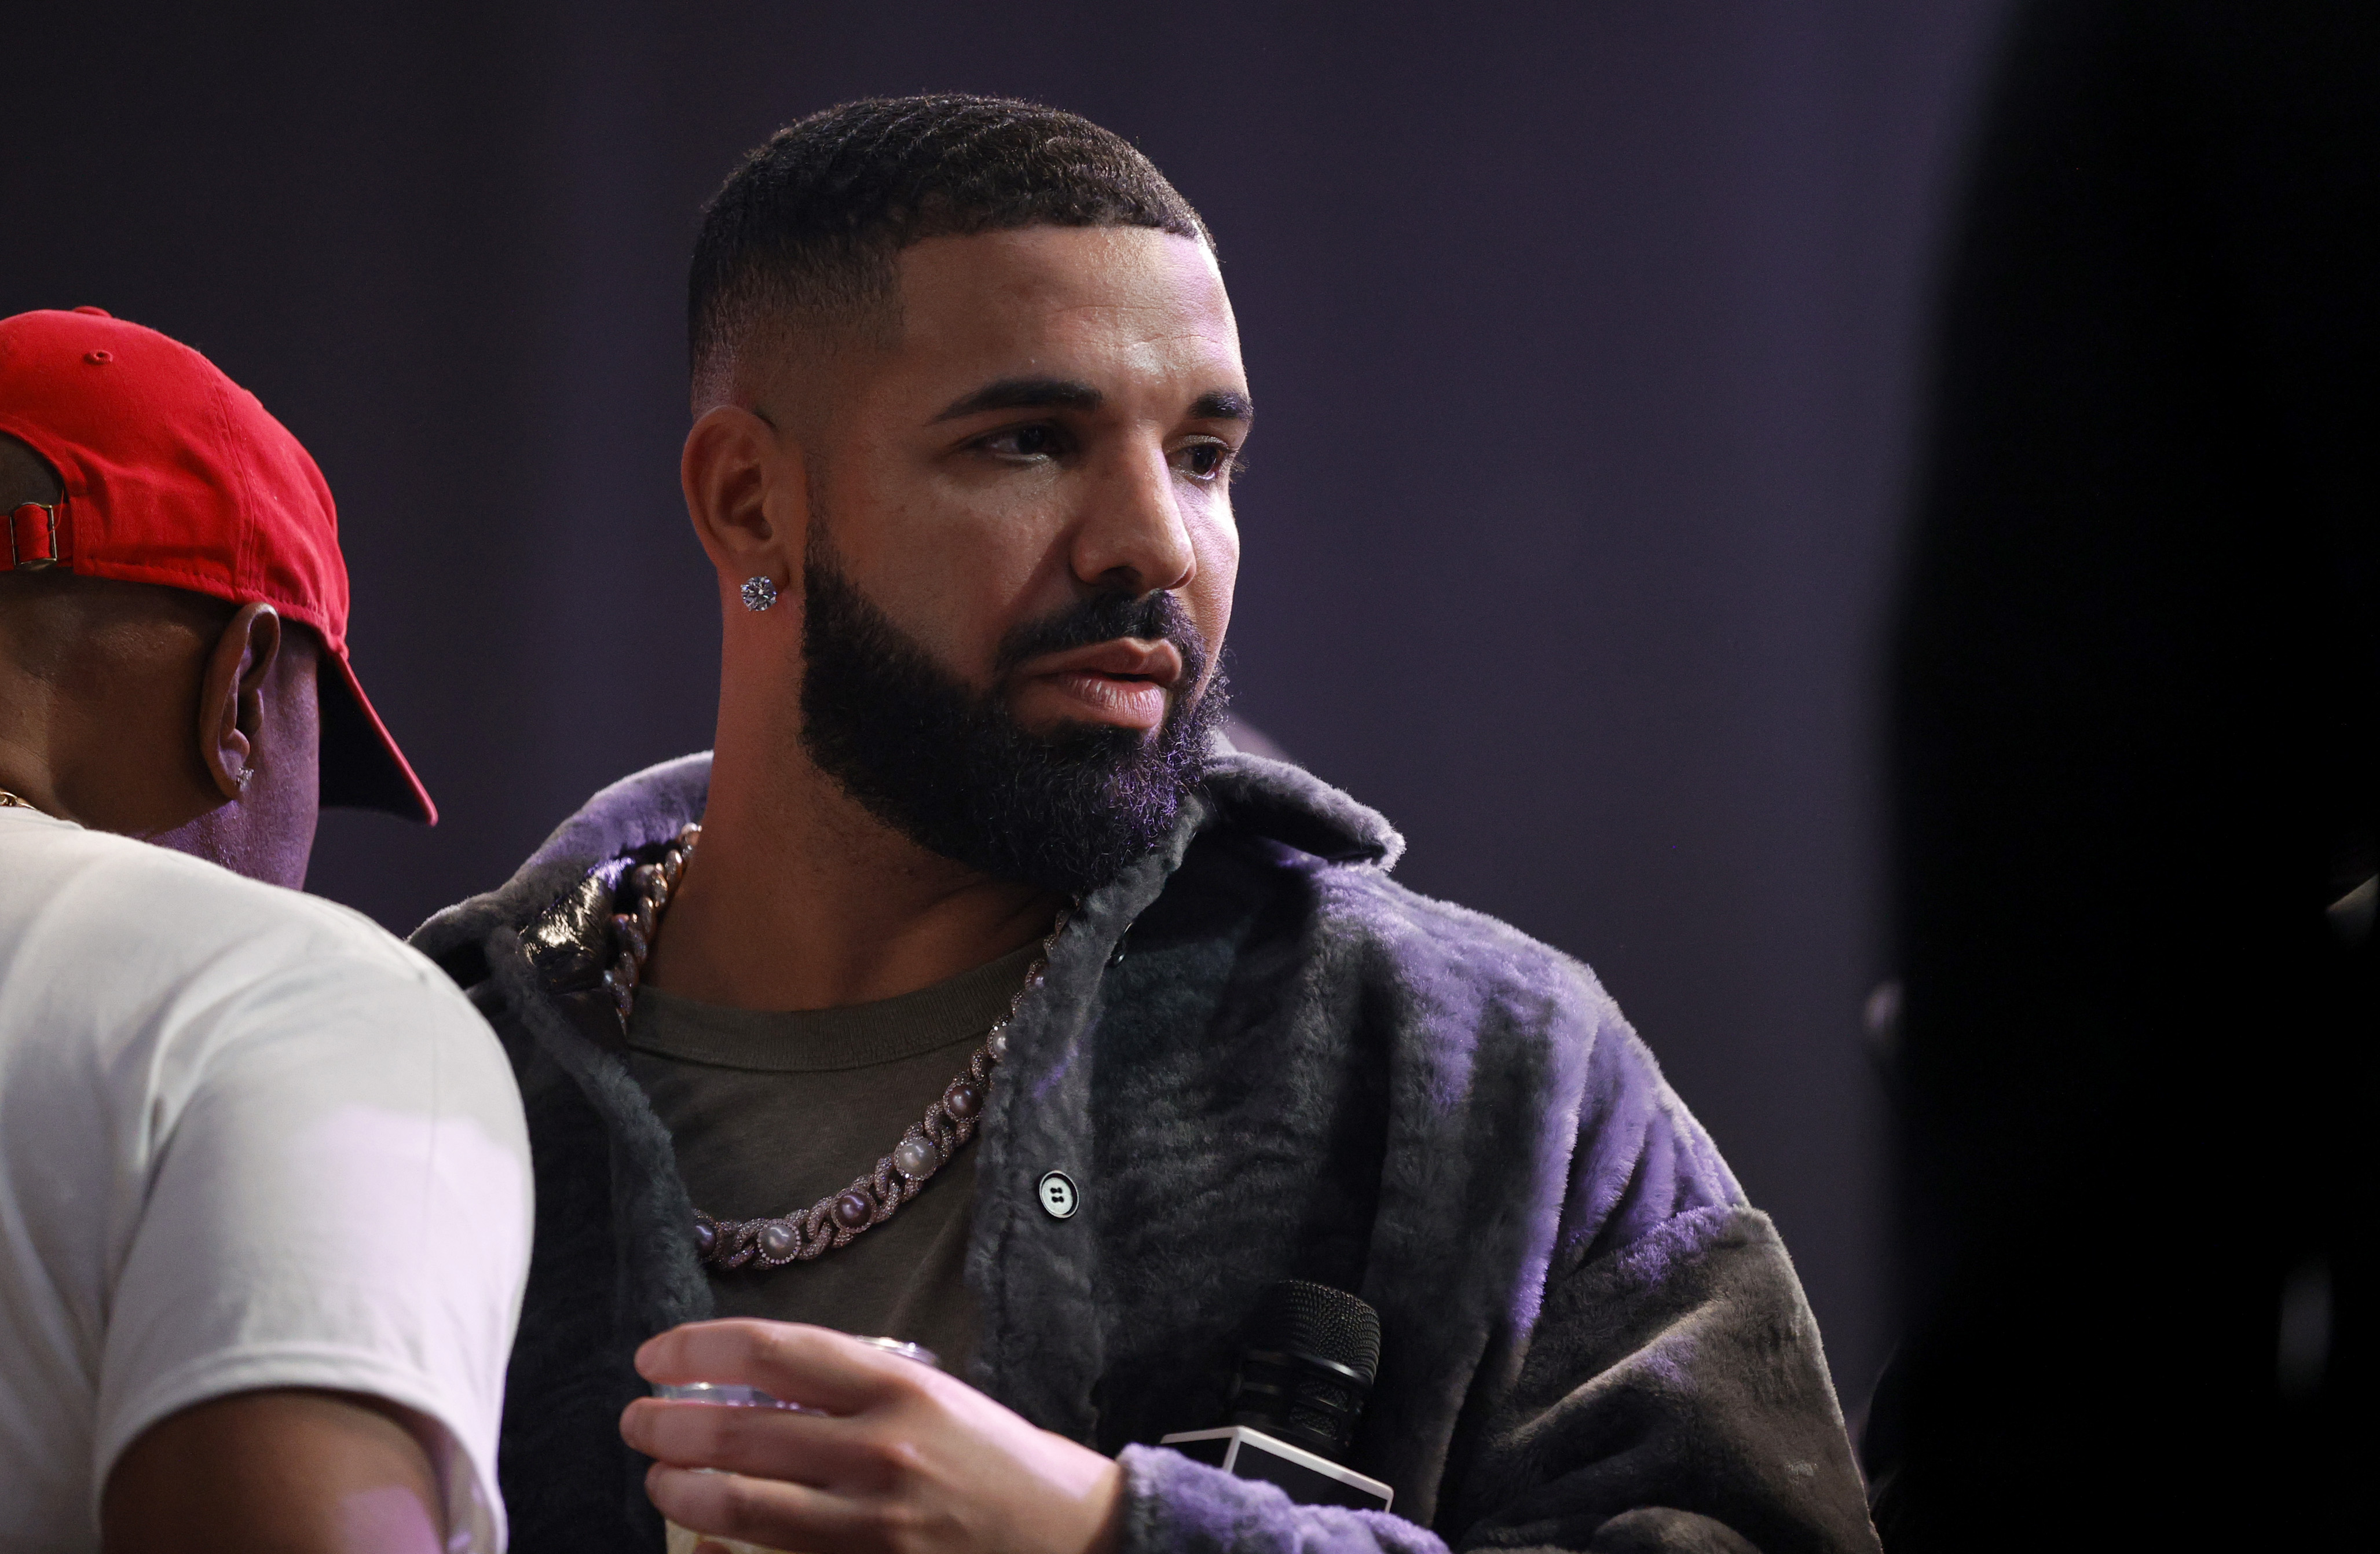 Drake honors late Virgil Abloh with new tattoo